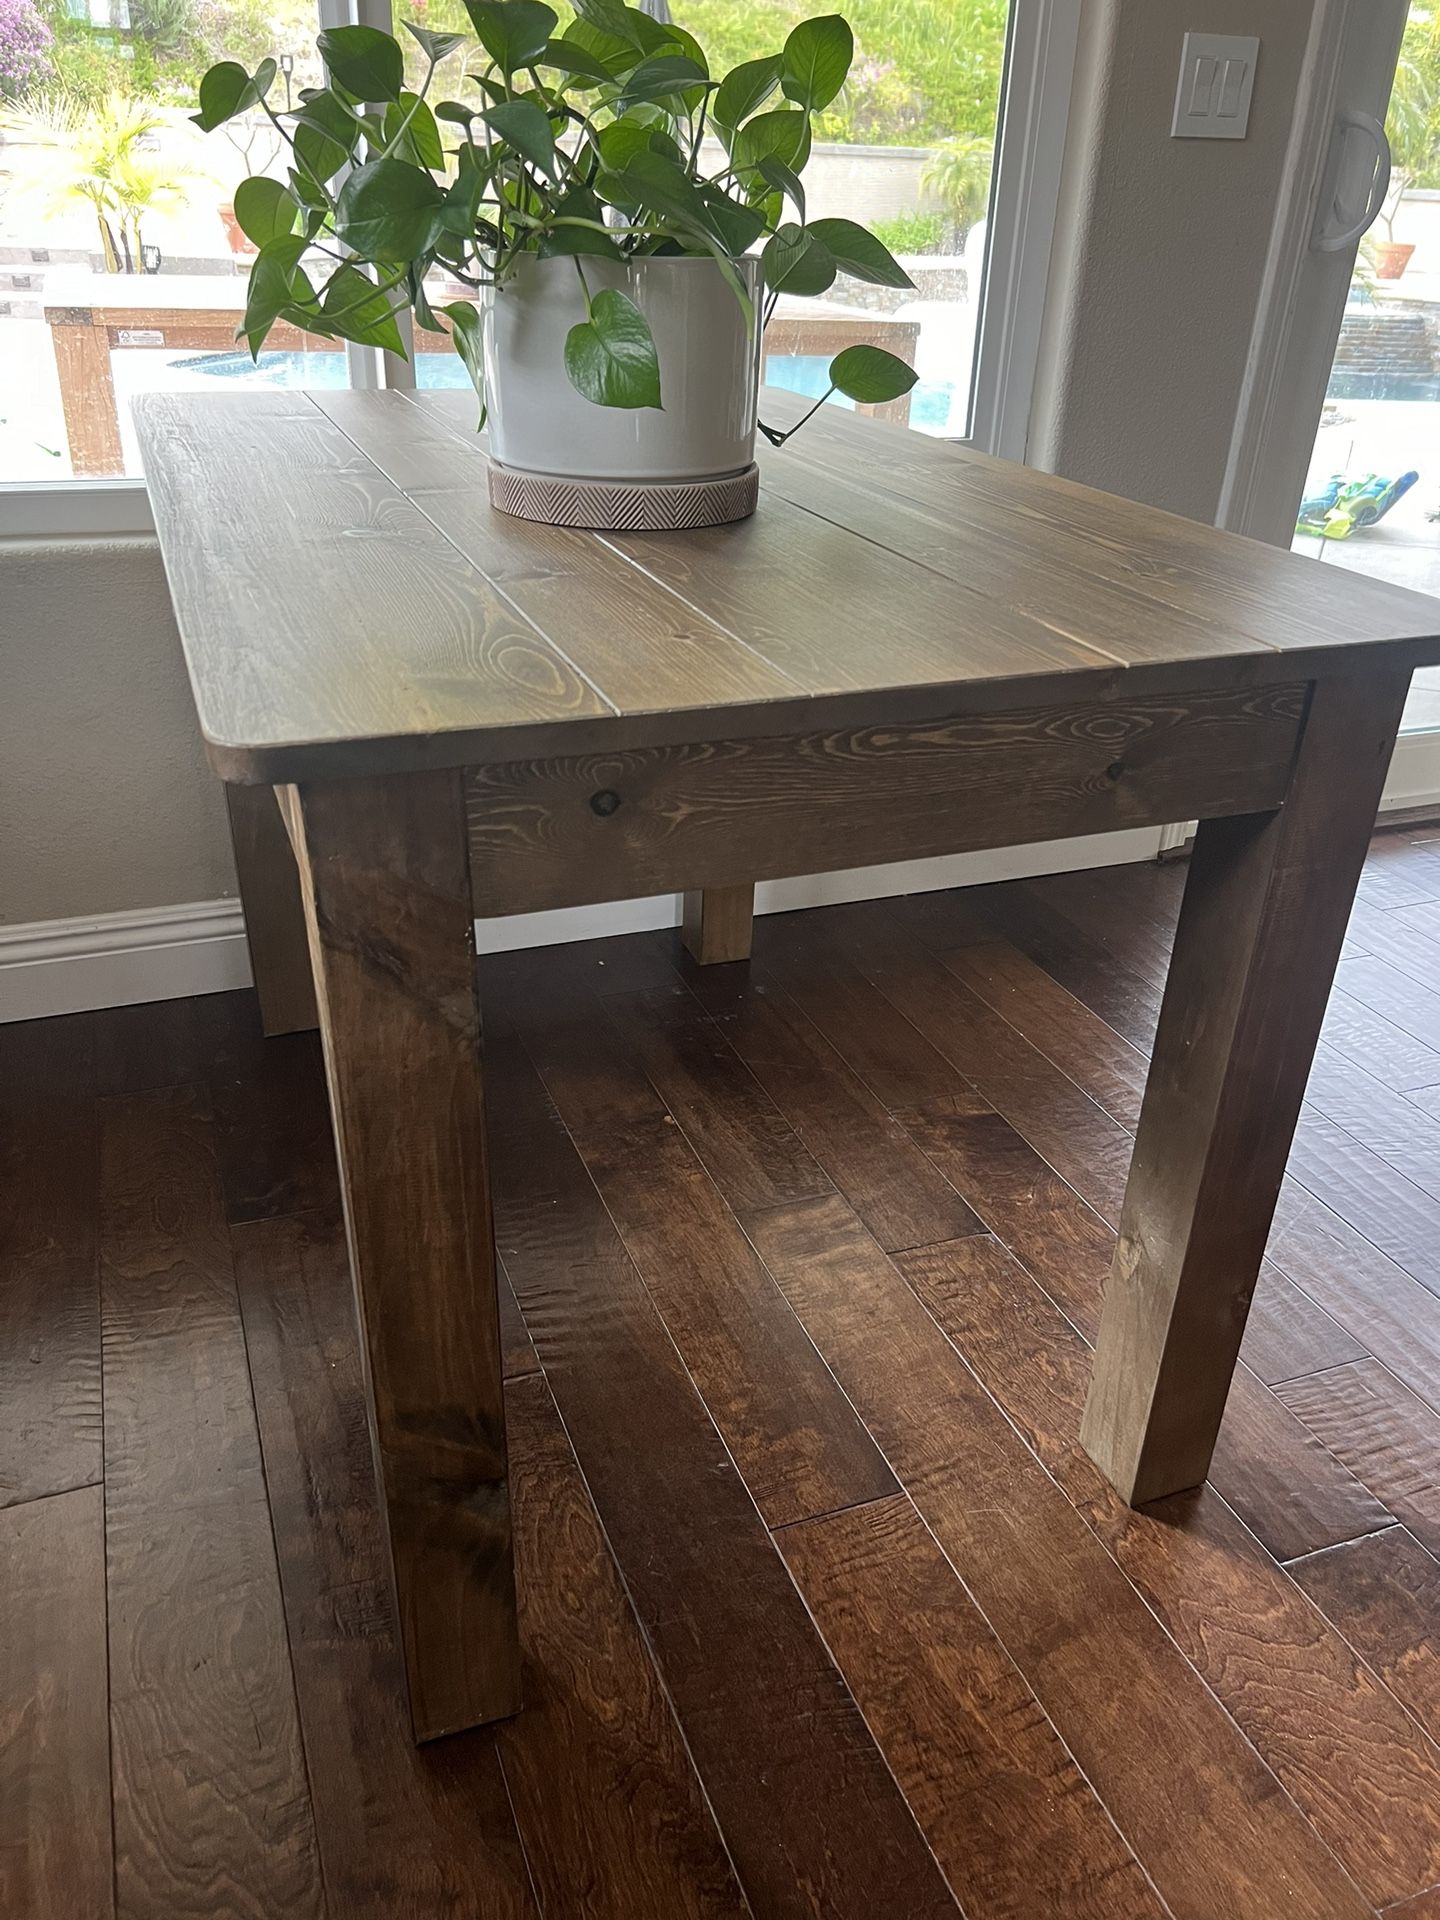 NEW SOLID WOOD TABLE! Just purchased and didnt work in kitchen. measurements in photos.